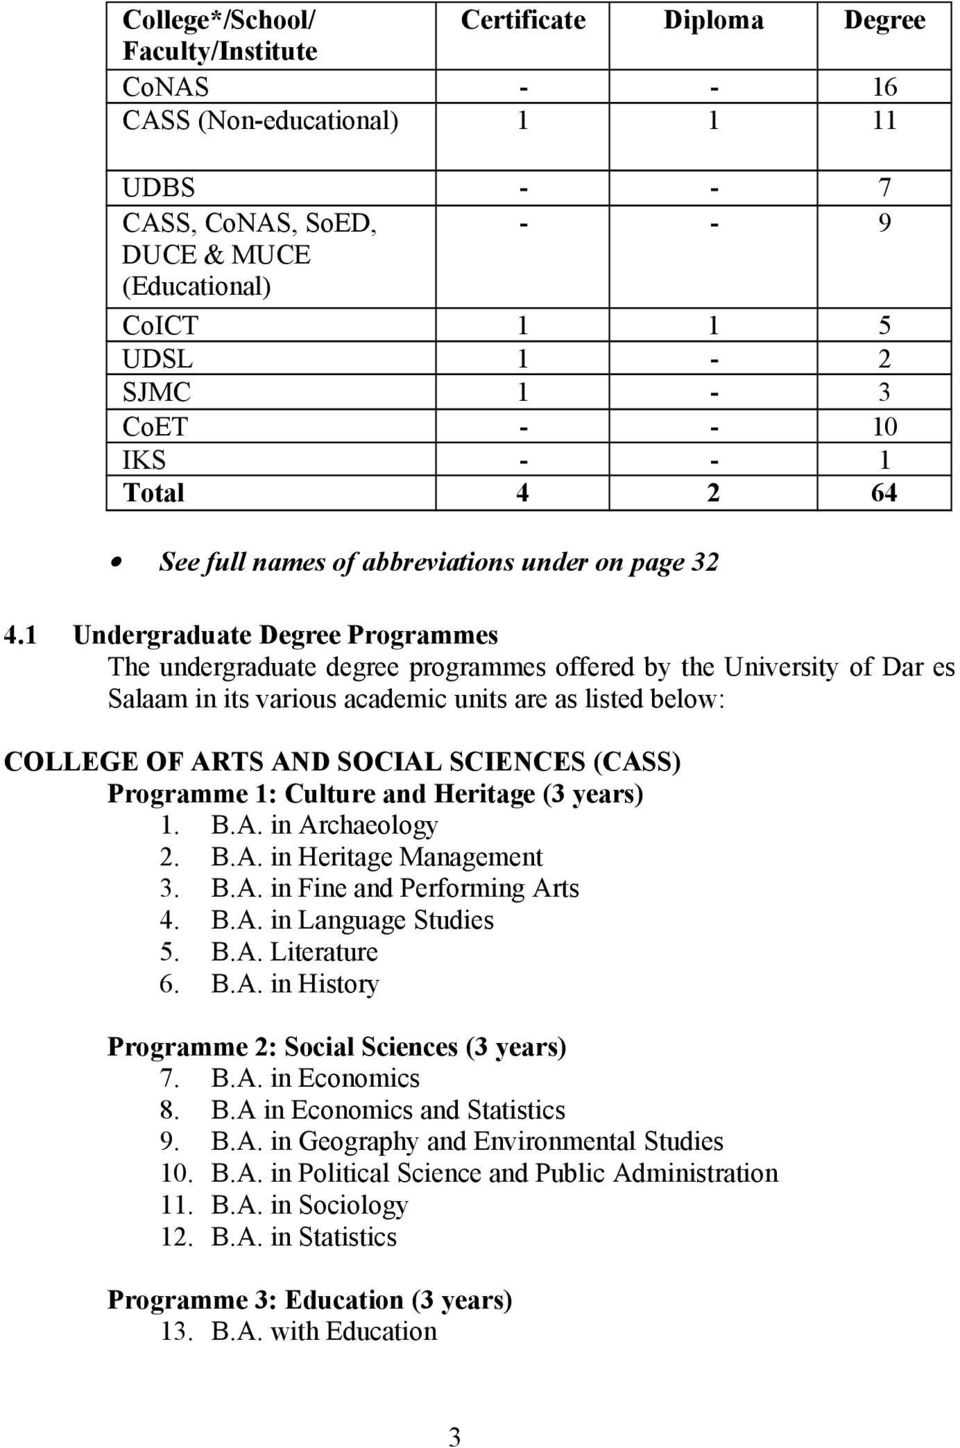 1 Undergraduate Degree Programmes The undergraduate degree programmes offered by the University of Dar es Salaam in its various academic units are as listed below: COLLEGE OF ARTS AND SOCIAL SCIENCES